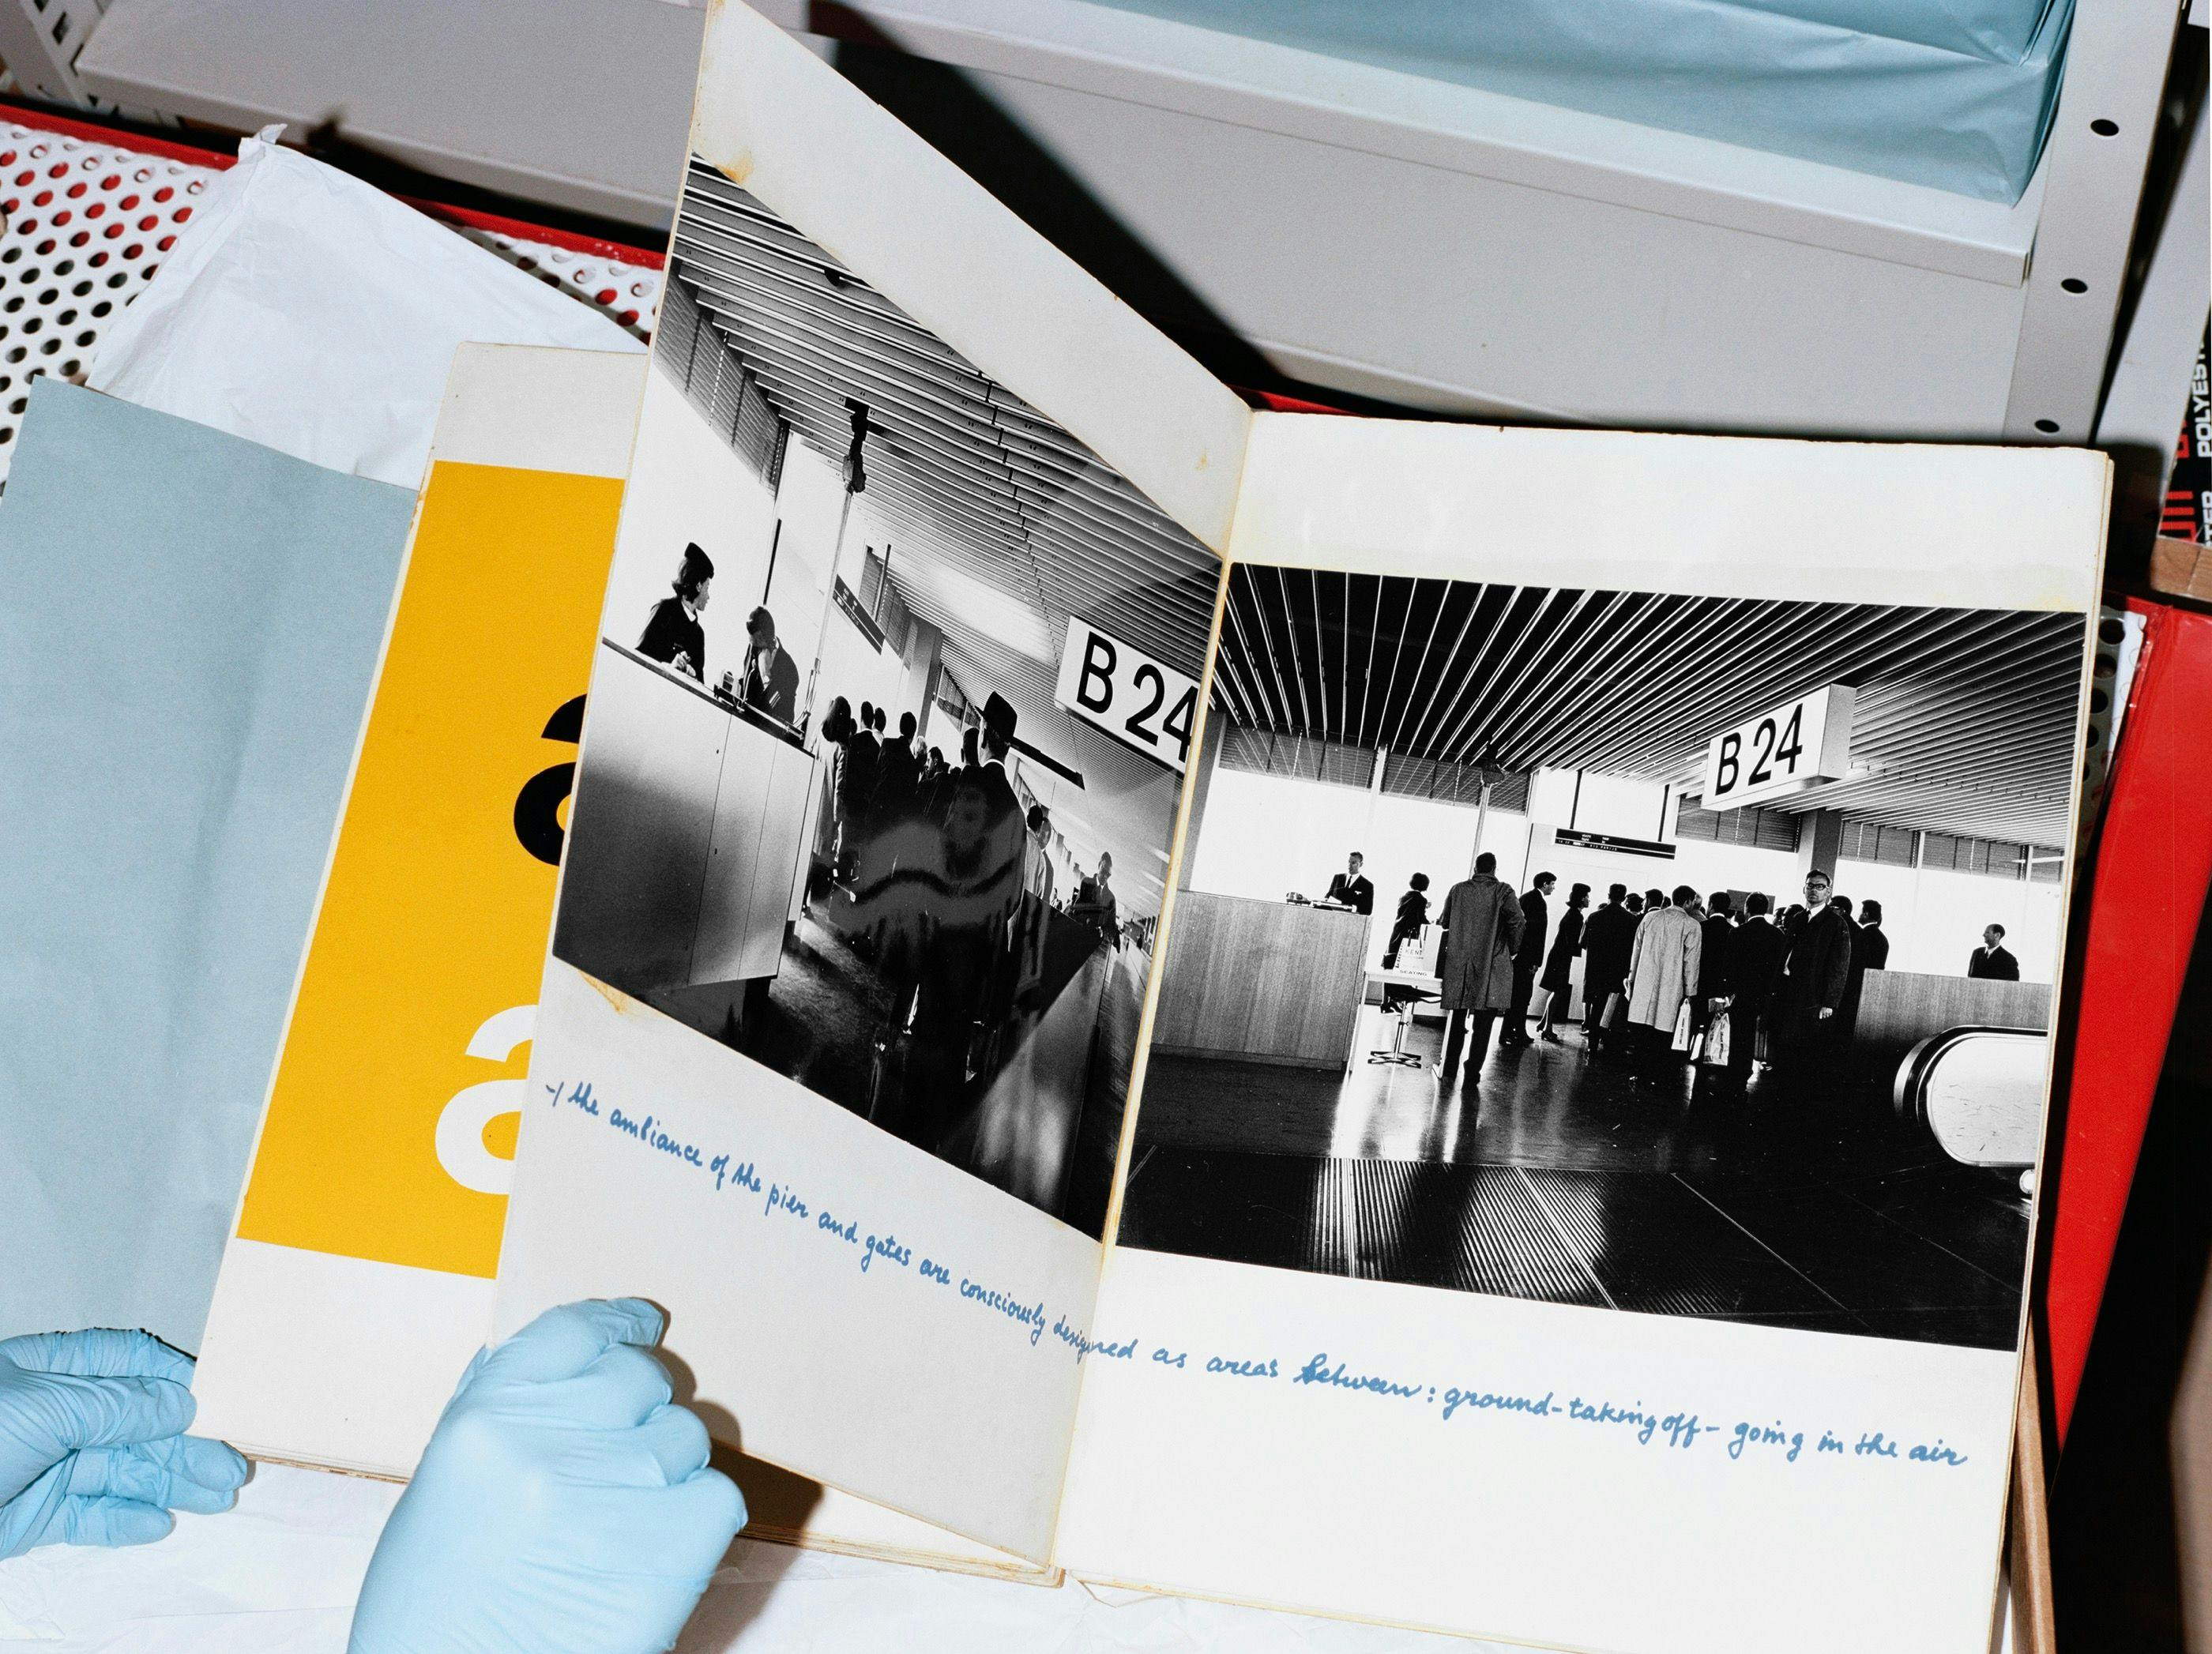 Kho Liang Ie, Schipholboek: a presentation book bound in wood featuring photographs, design studies and handwritten comments about the interior of Schiphol Airport, originally made for a Unesco presentation. Archive Nel Verschuuren/Kho Liang Ie… 